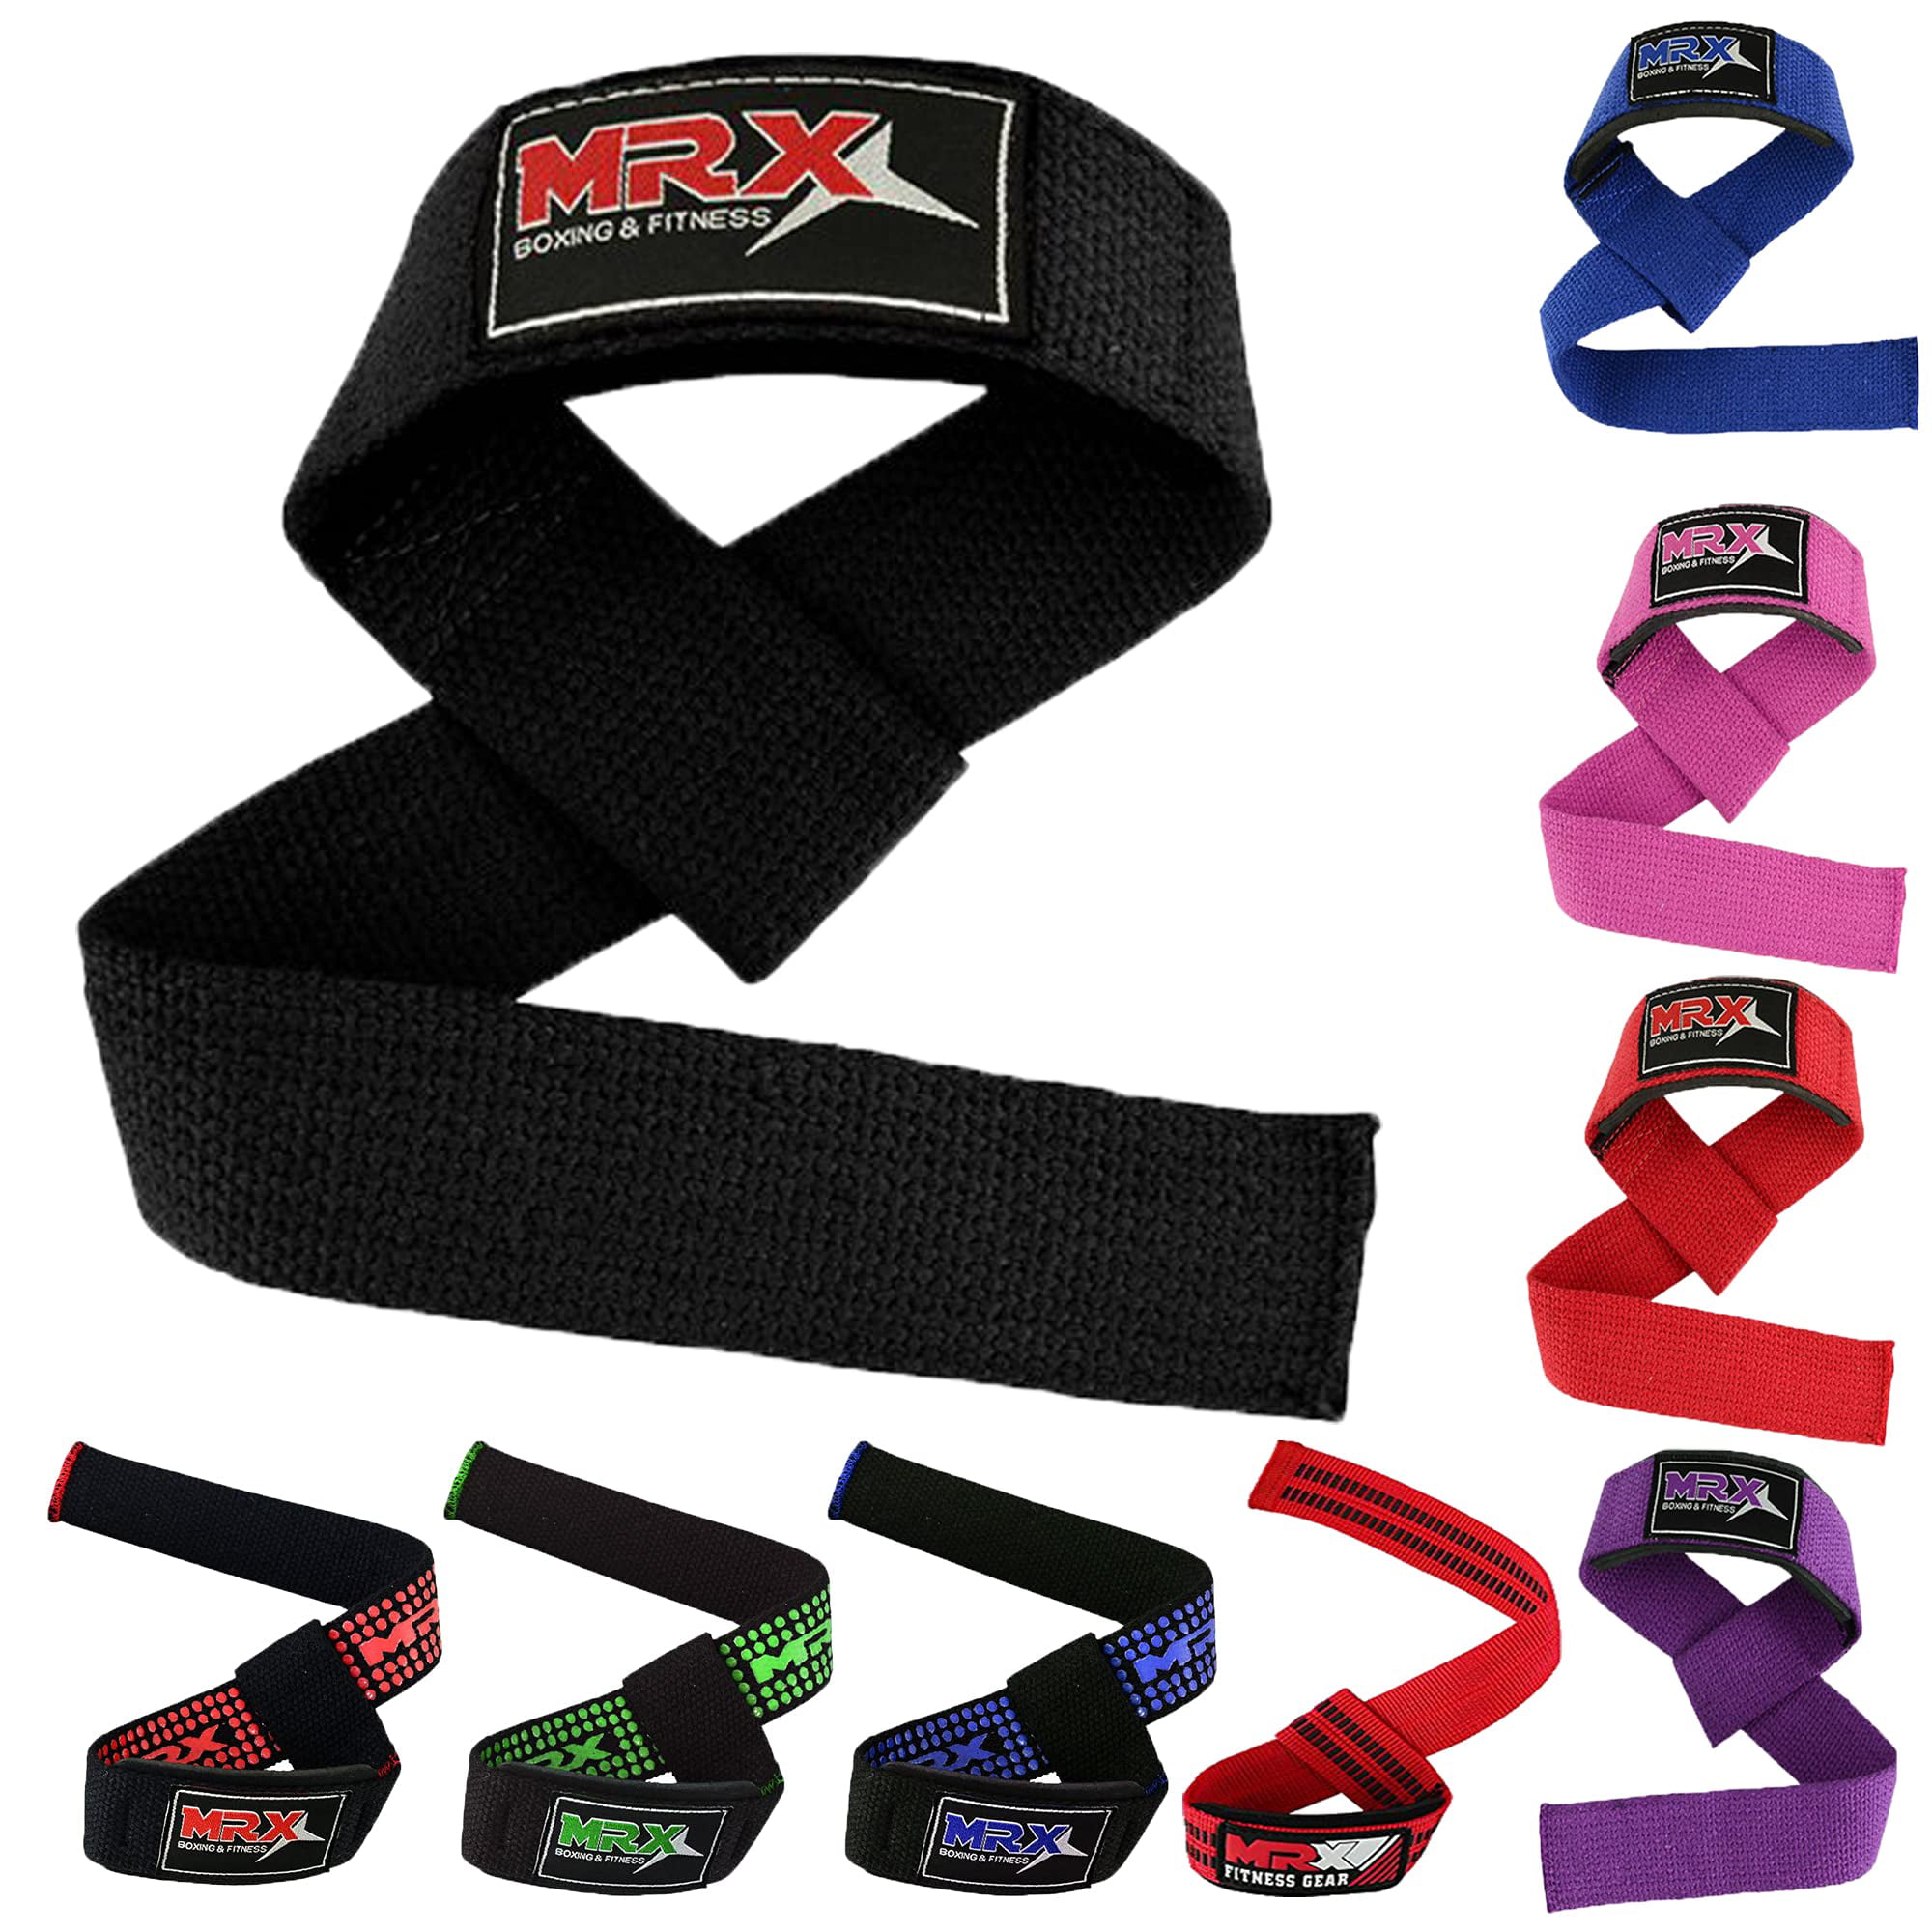 MRX Weightlifting Bar Straps Dead lift Bodybuilding Lifting Wraps Wrist Support 